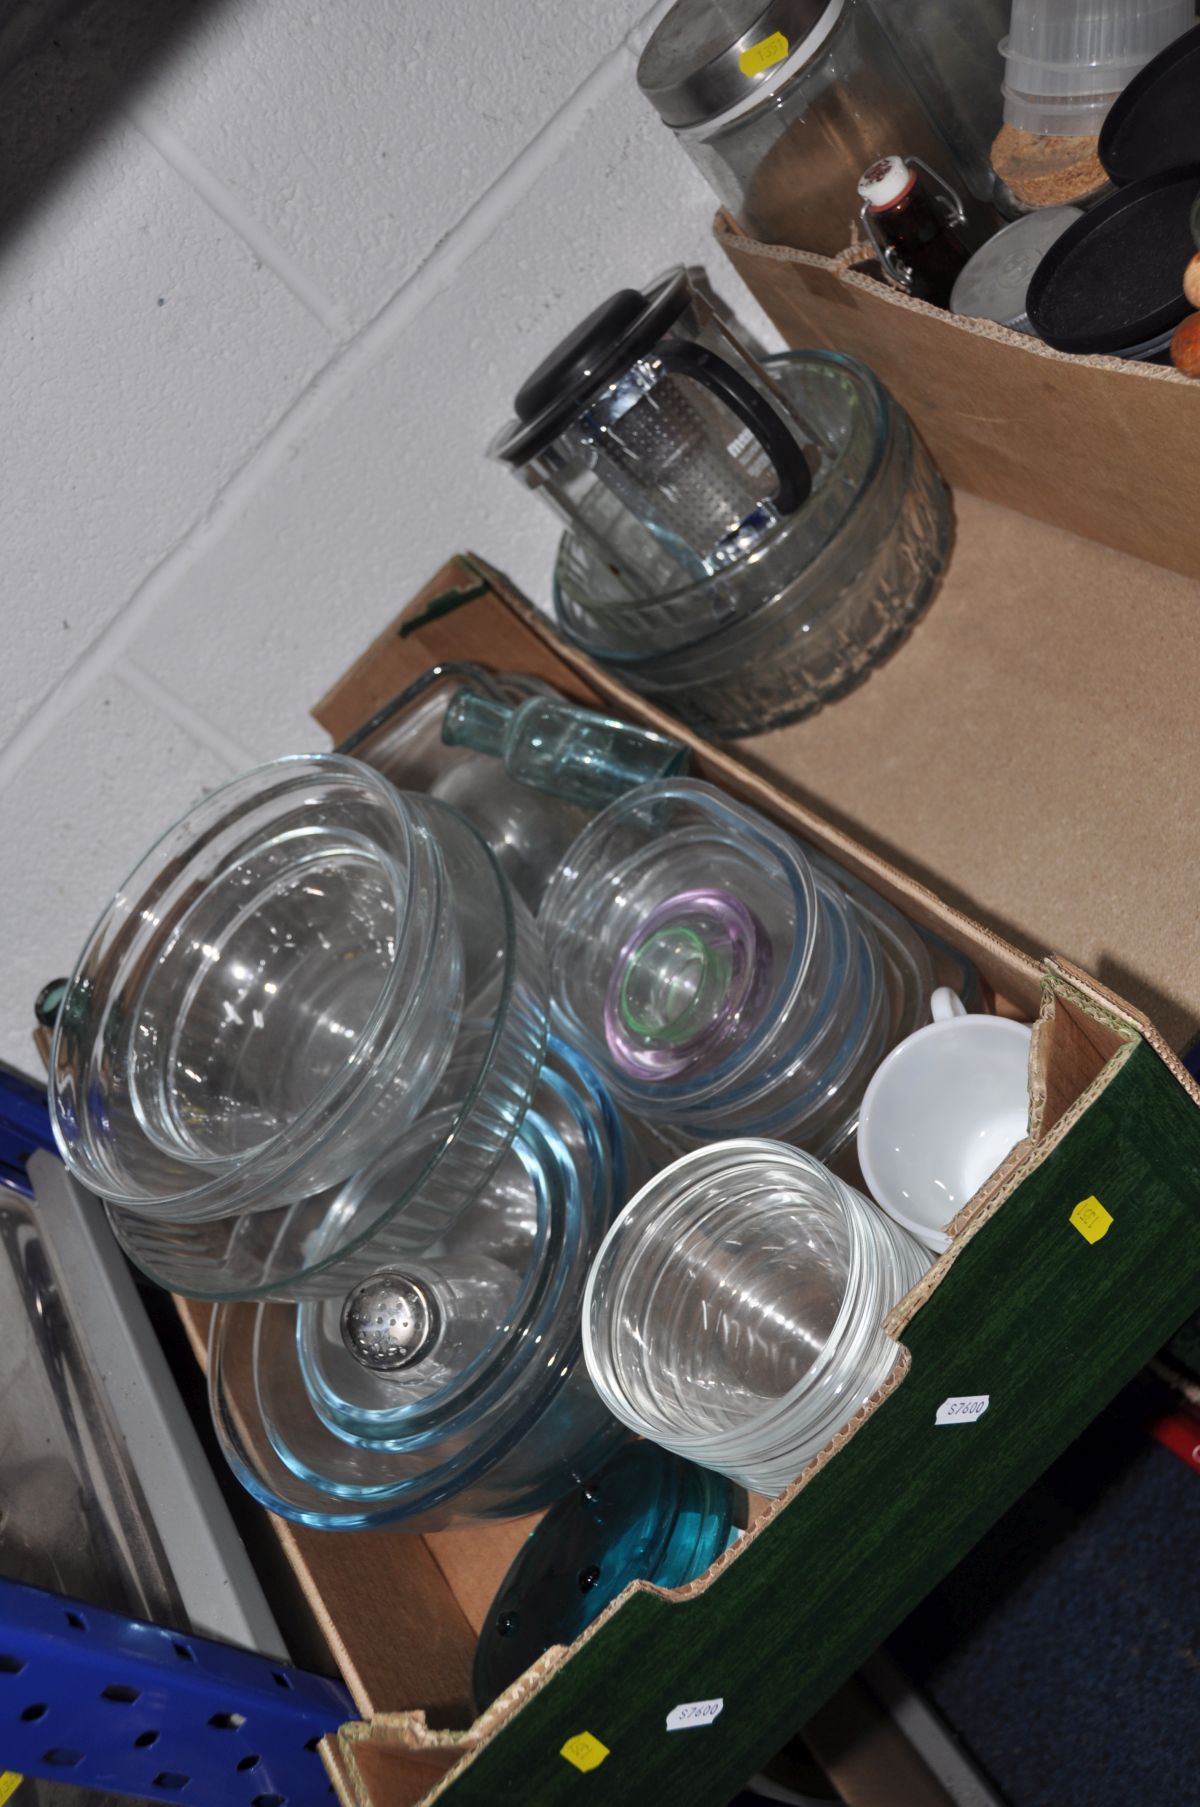 THREE BOXES AND LOOSE KITCHEN GLASSWARE, ETC, including Pyrex mixing bowls, glass and ceramic - Image 2 of 3